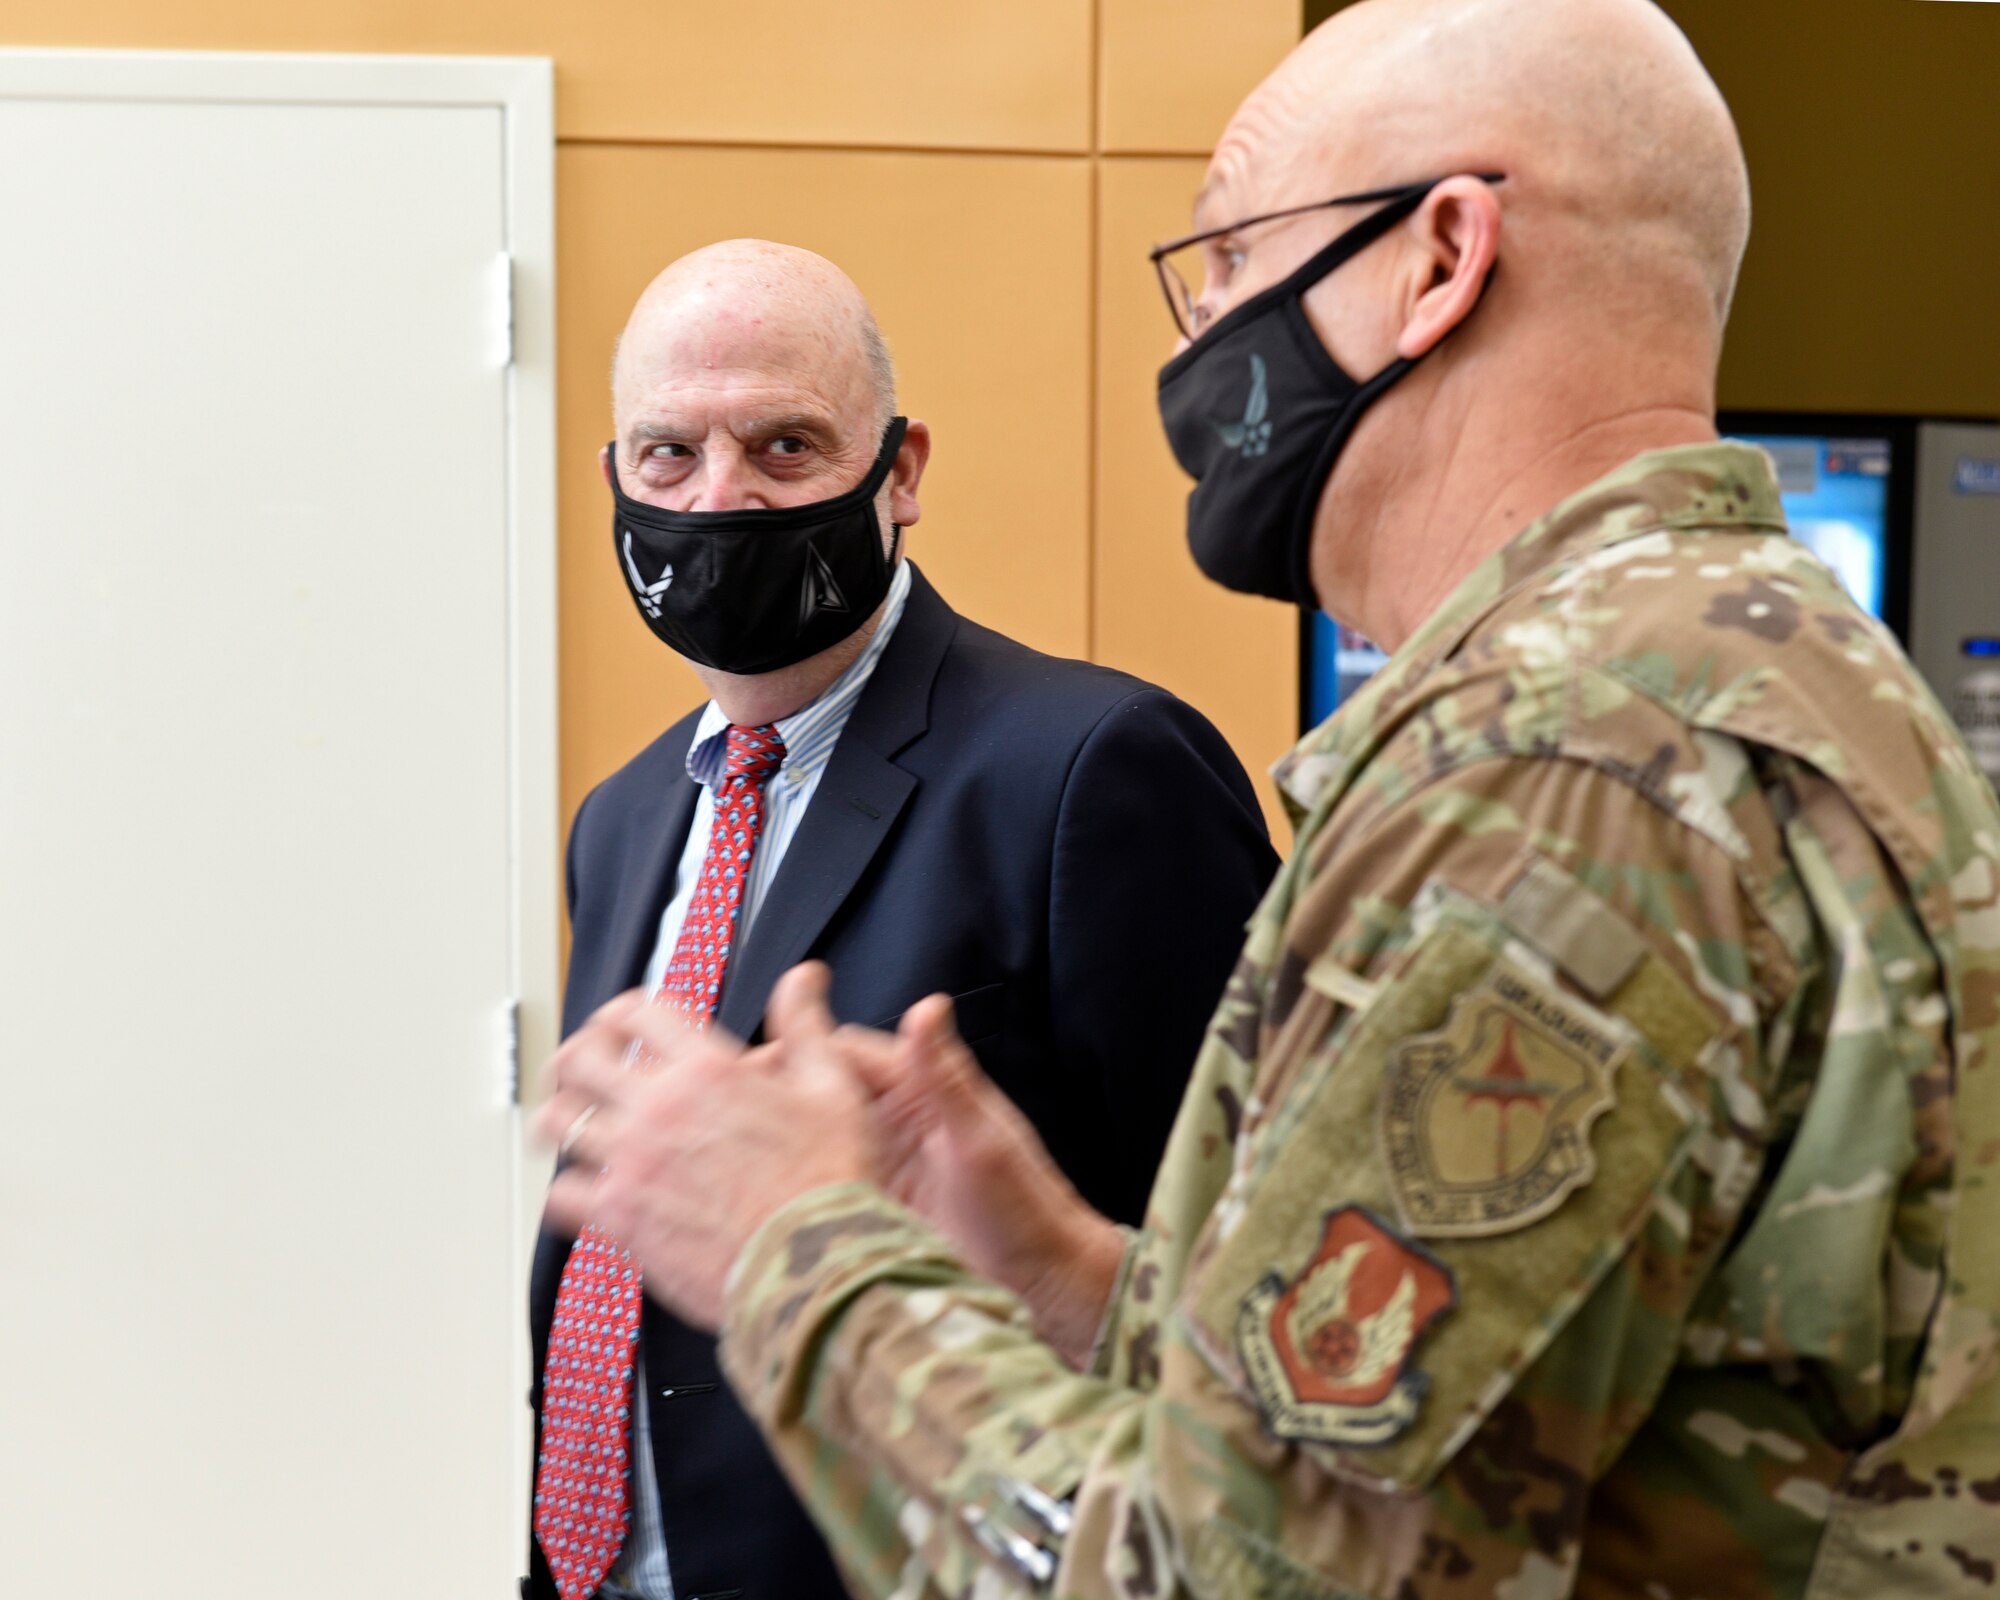 Acting Secretary of the Air Force John Roth, left, is briefed by Gen. Arnold W. Bunch Jr., commander, Air Force Materiel Command, before touring the U.S. Air Force School of Aerospace Medicine Epidemiology Laboratory at Wright-Patterson Air Force Base, Ohio, March 23, 2021.  The lab is responsible for analyzing a majority of the COVID-19 tests in the Air Force. Roth met with Air Force personnel and toured several facilities at the base including the National Air and Space Intelligence Center. (U.S. Air Force photo by Ty Greenlees)